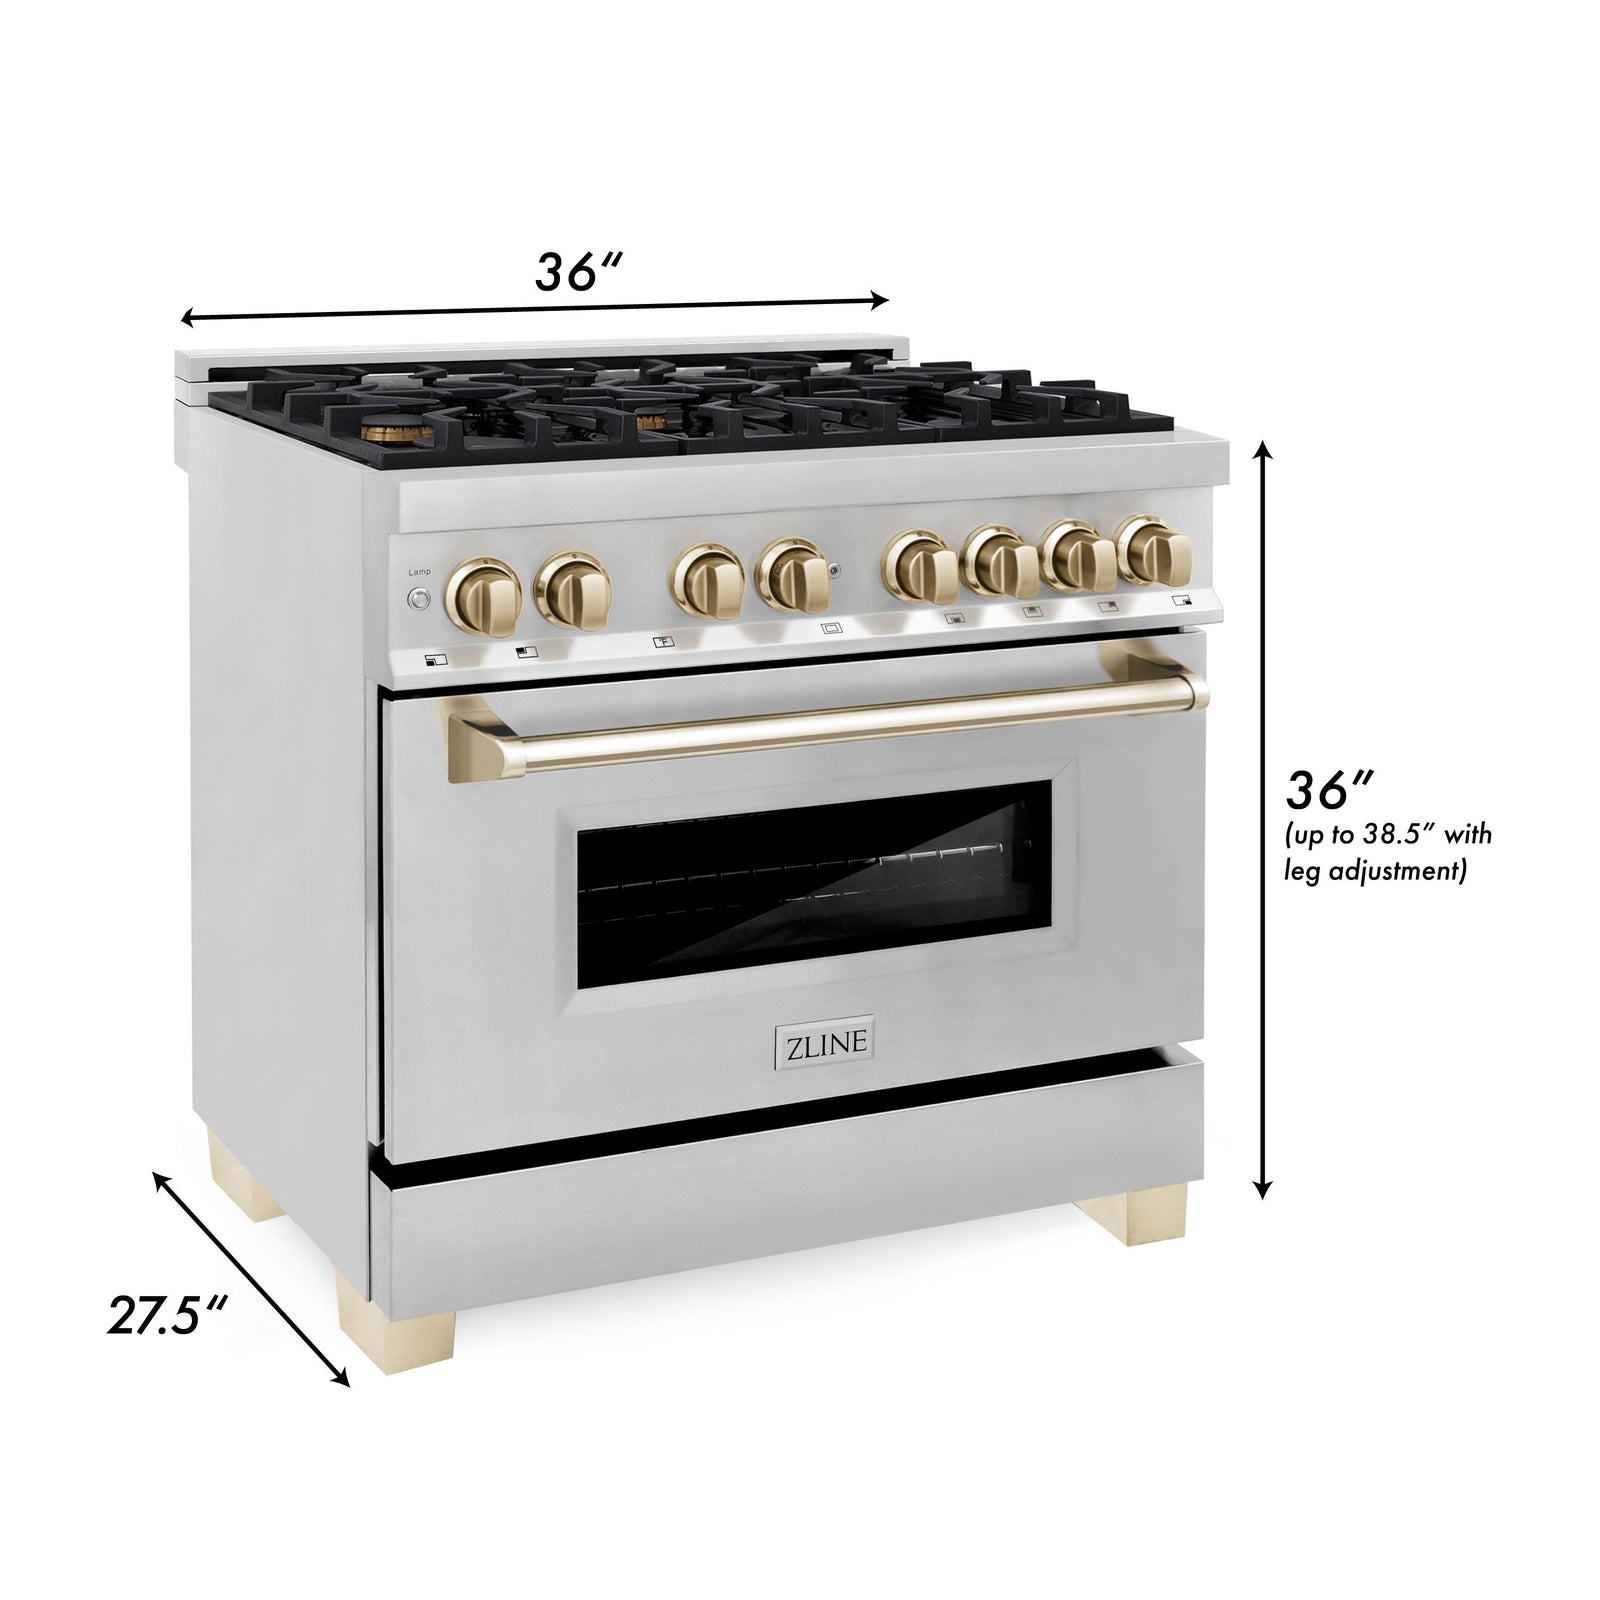 ZLINE Kitchen and Bath Autograph Edition 36 In. Range with Gas Stove and Electric Oven in Stainless Steel with Gold Accent, RAZ-36-G - Smart Kitchen Lab